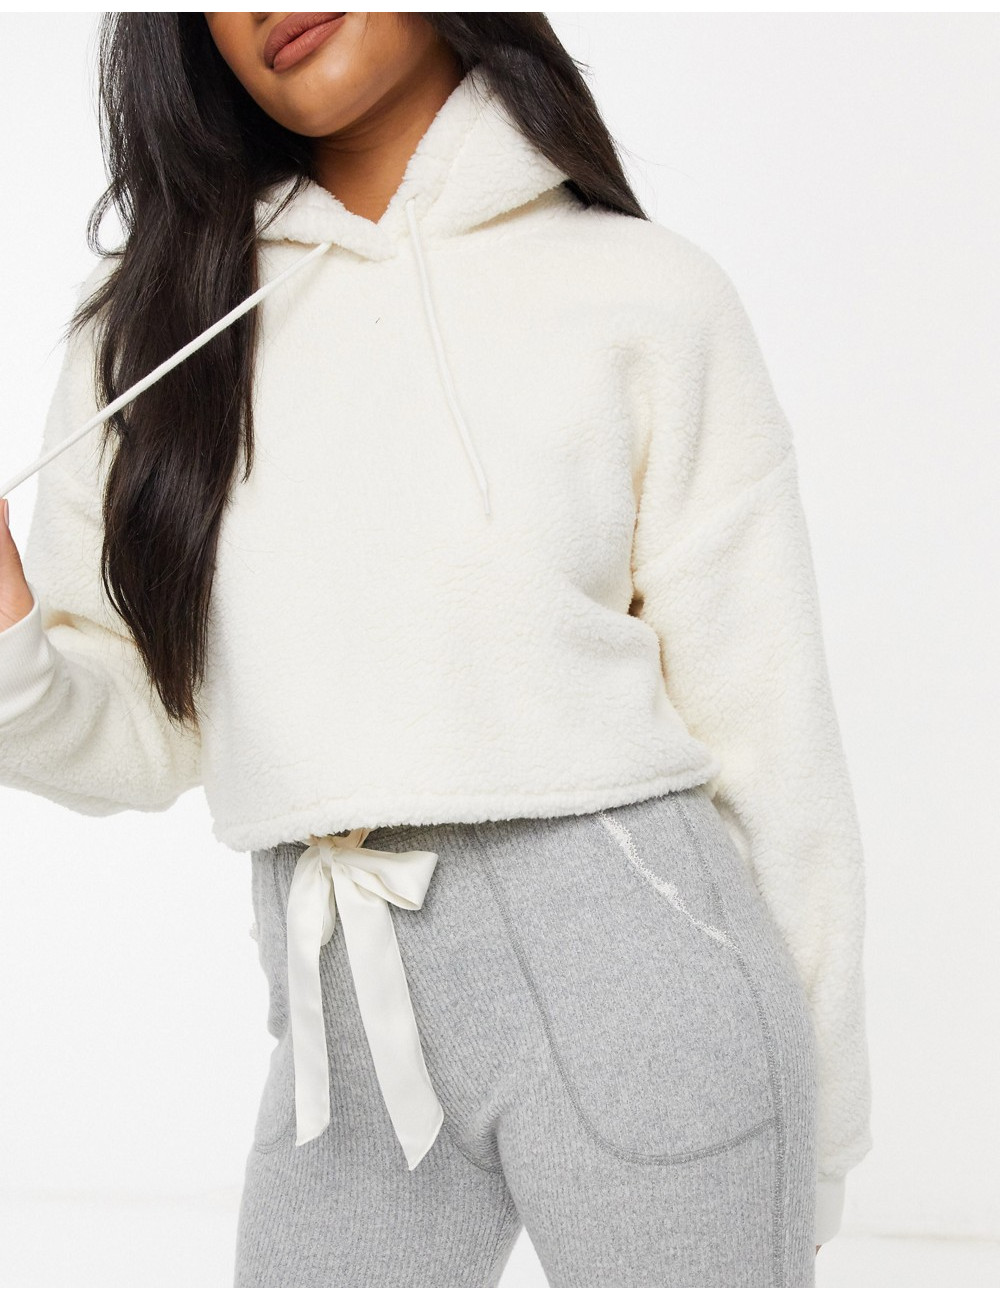 Gilly Hicks cozy hoodie in...